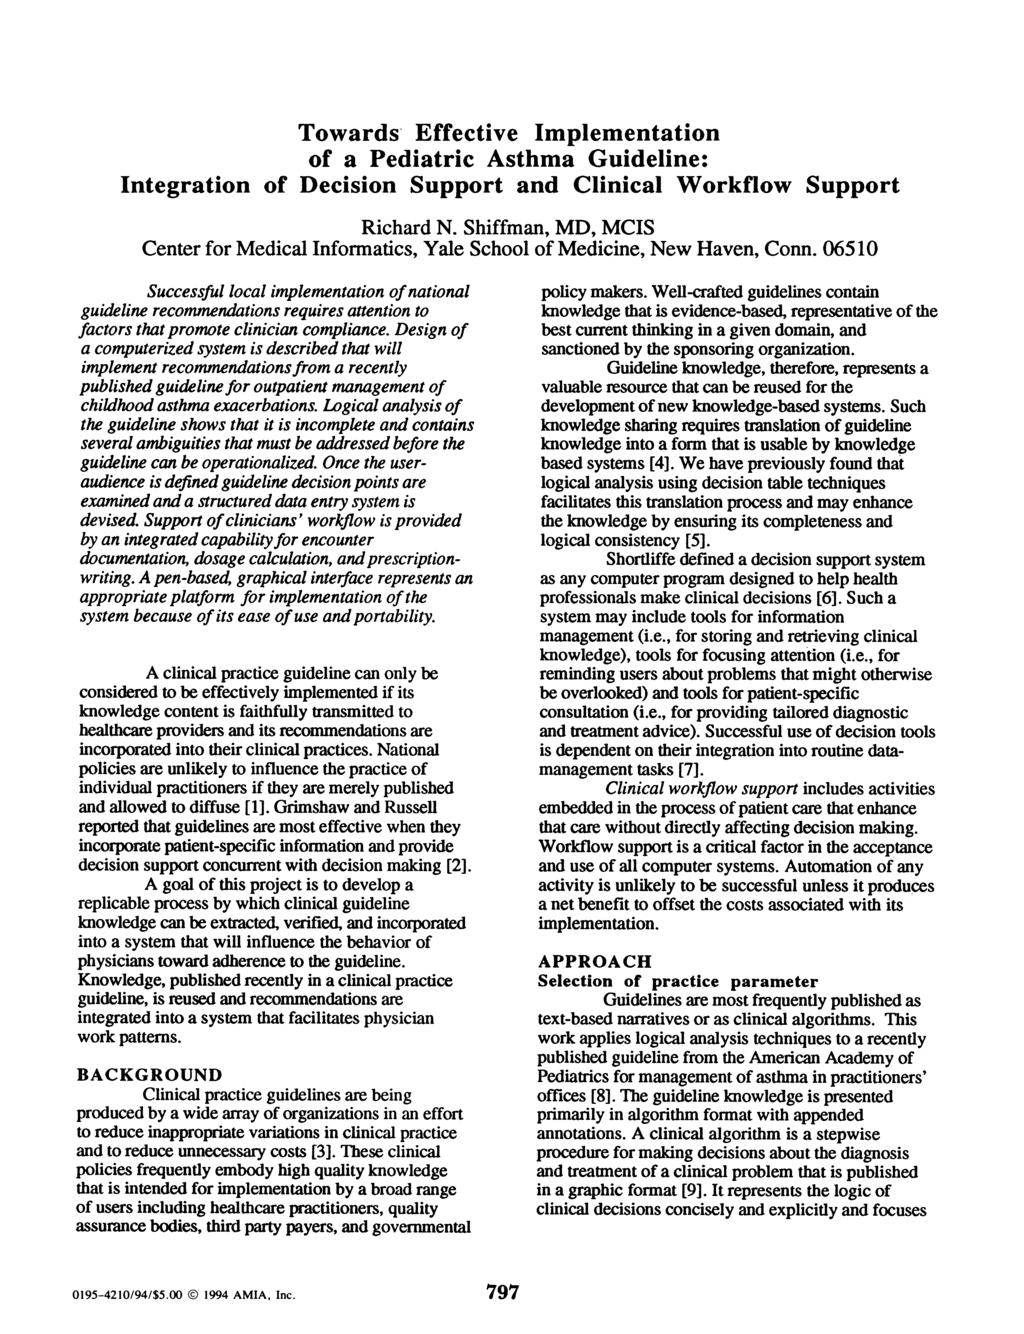 Towards Effective Implementation of a Pediatric Asthma Guideline: Integration of Decision Support and Clinical Workflow Support Richard N.